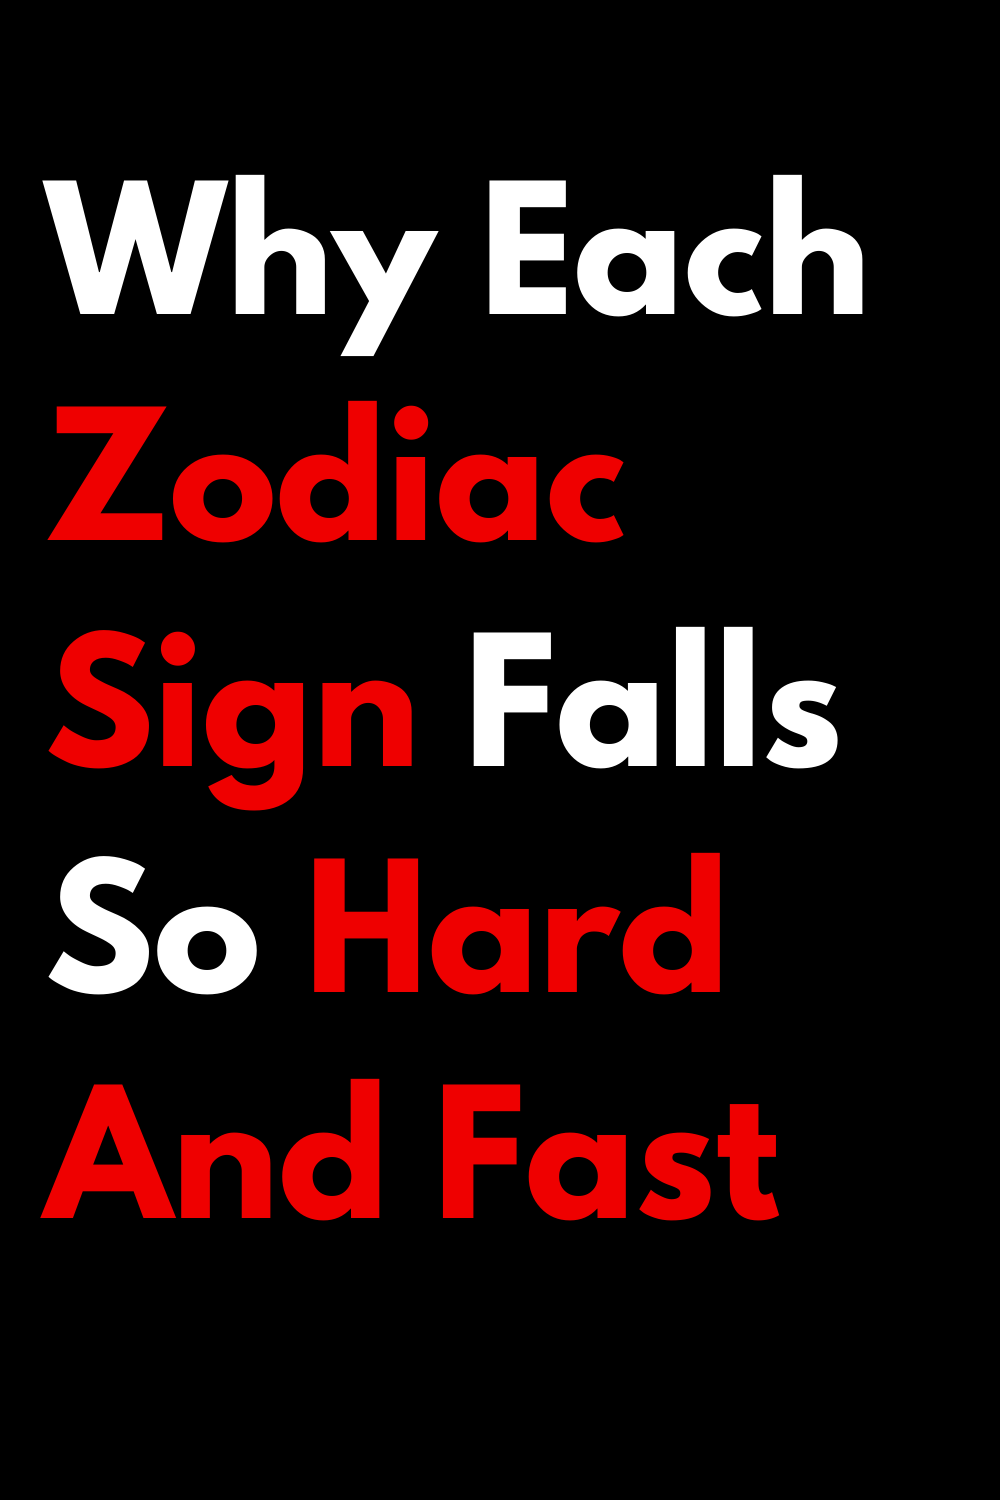 Why Each Zodiac Sign Falls So Hard And Fast